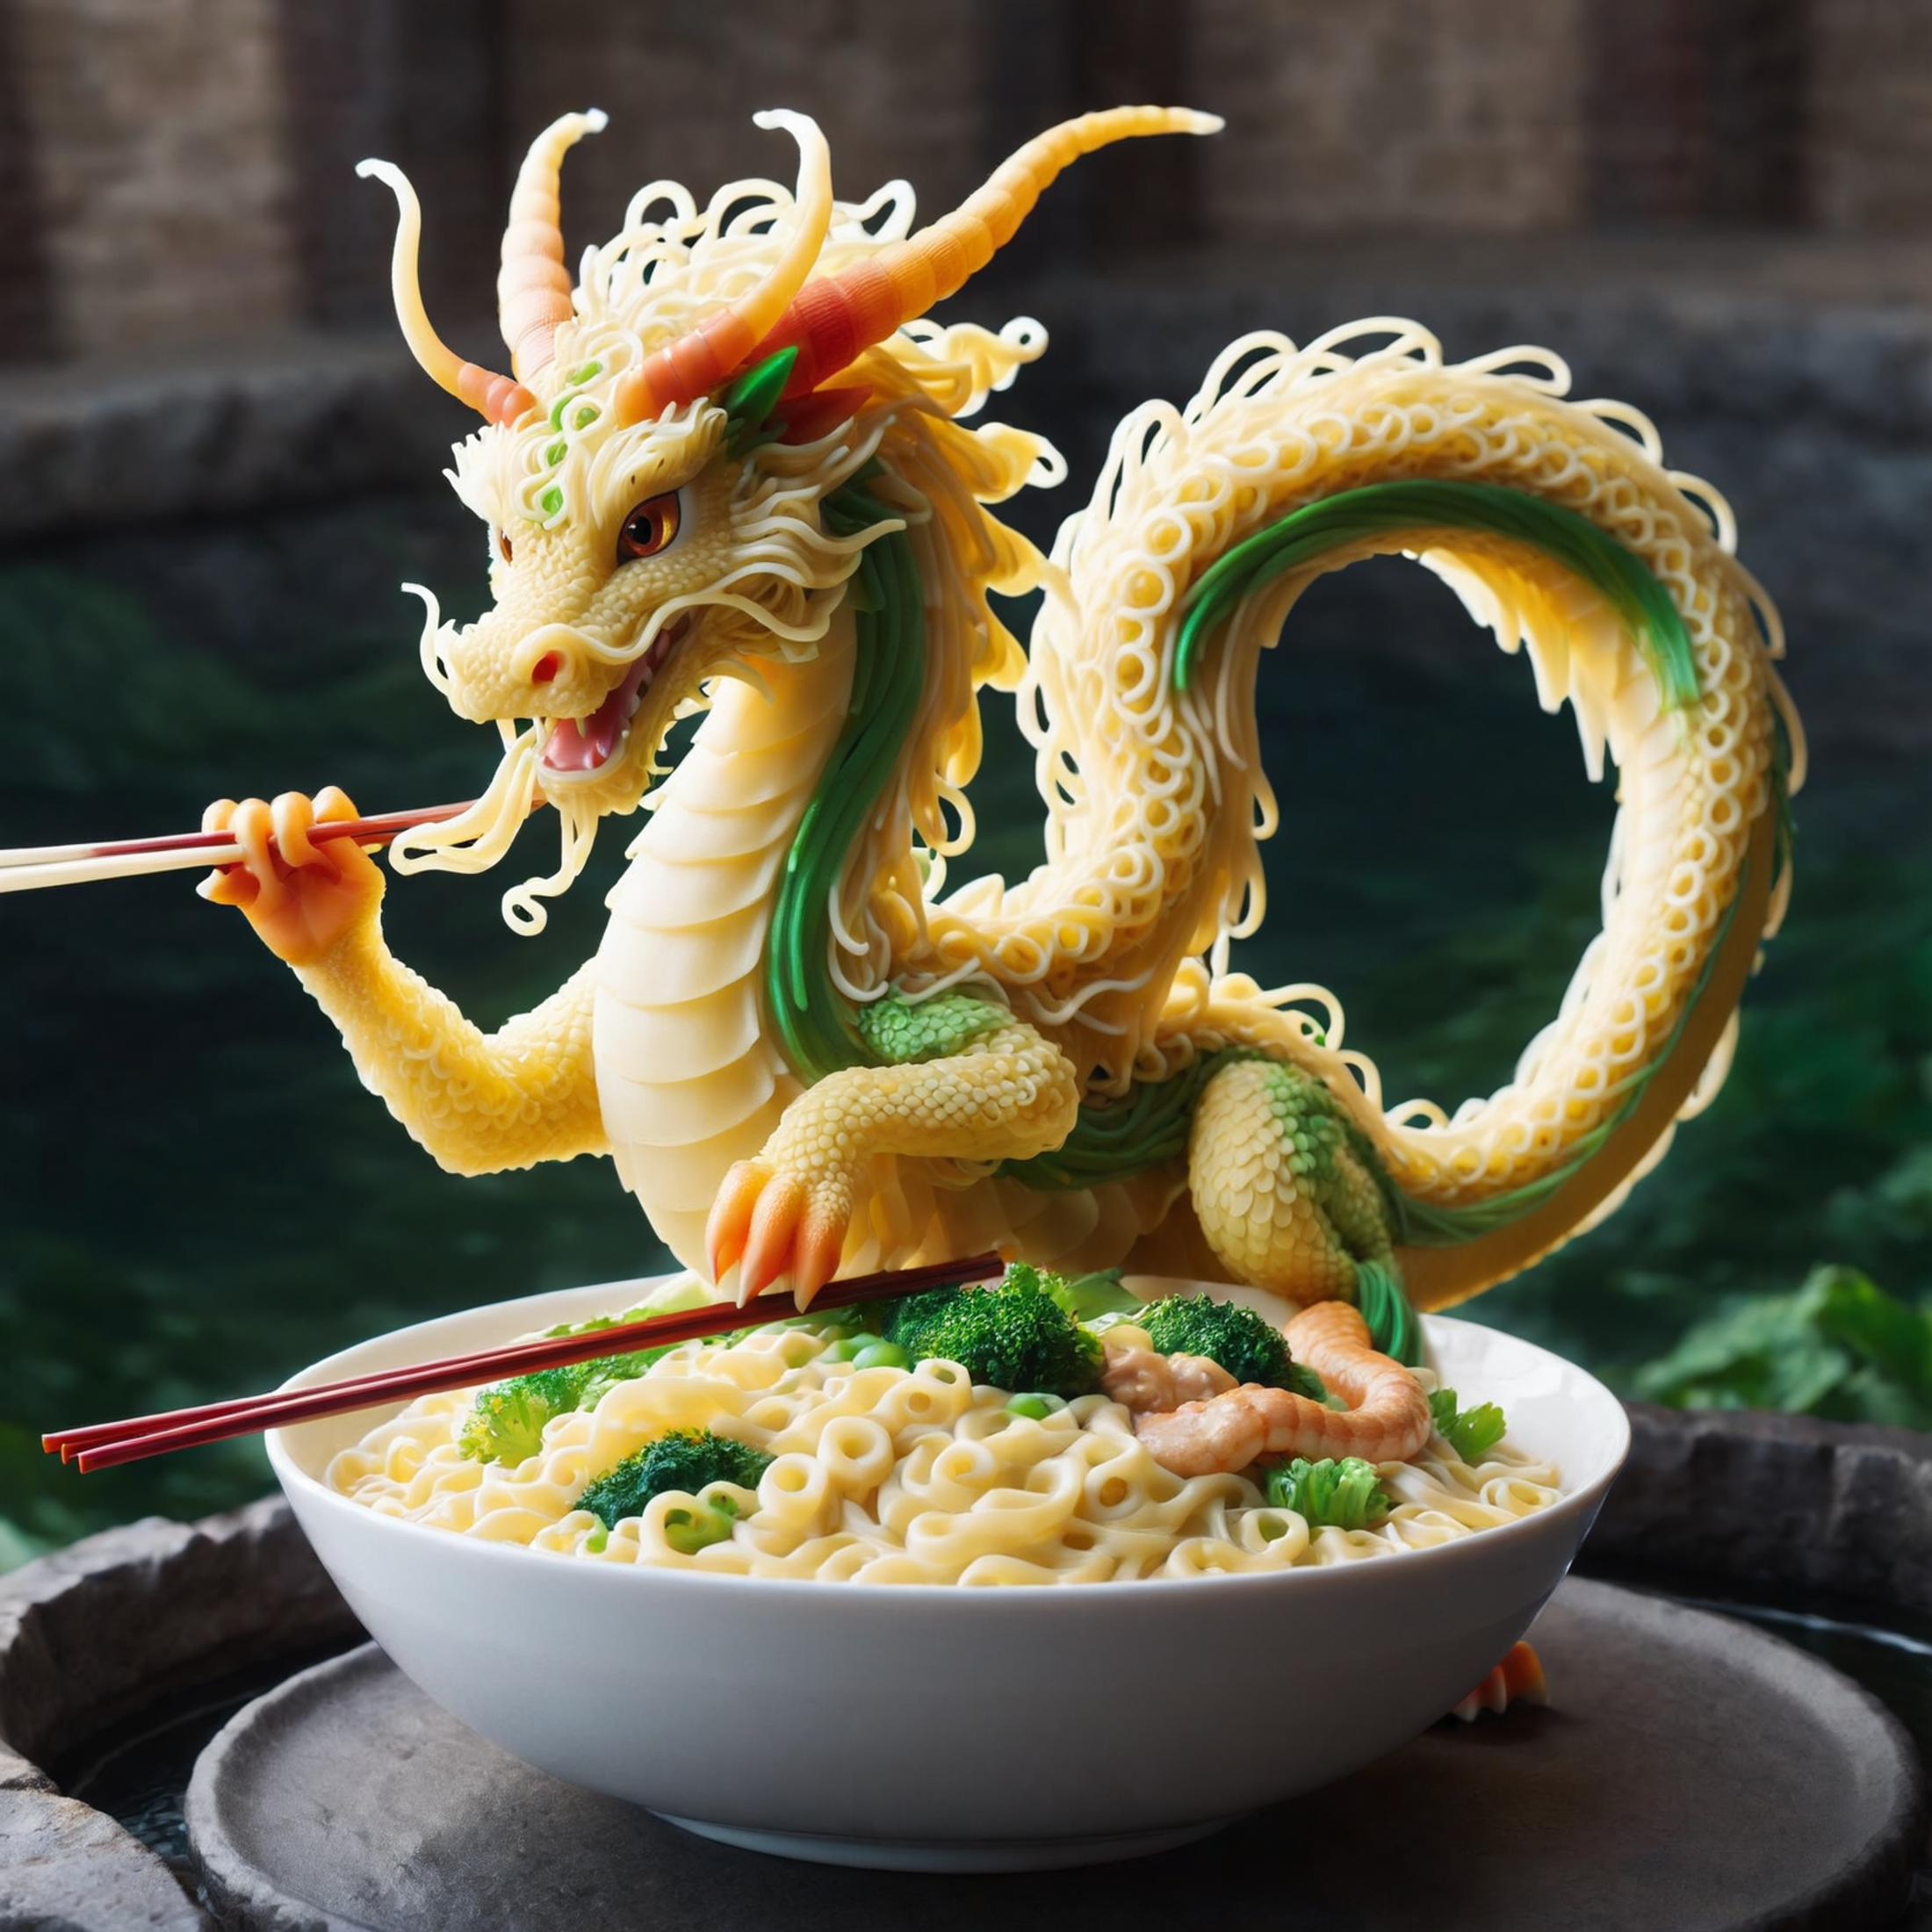 A dragon-shaped noodle dish with broccoli and chopsticks.